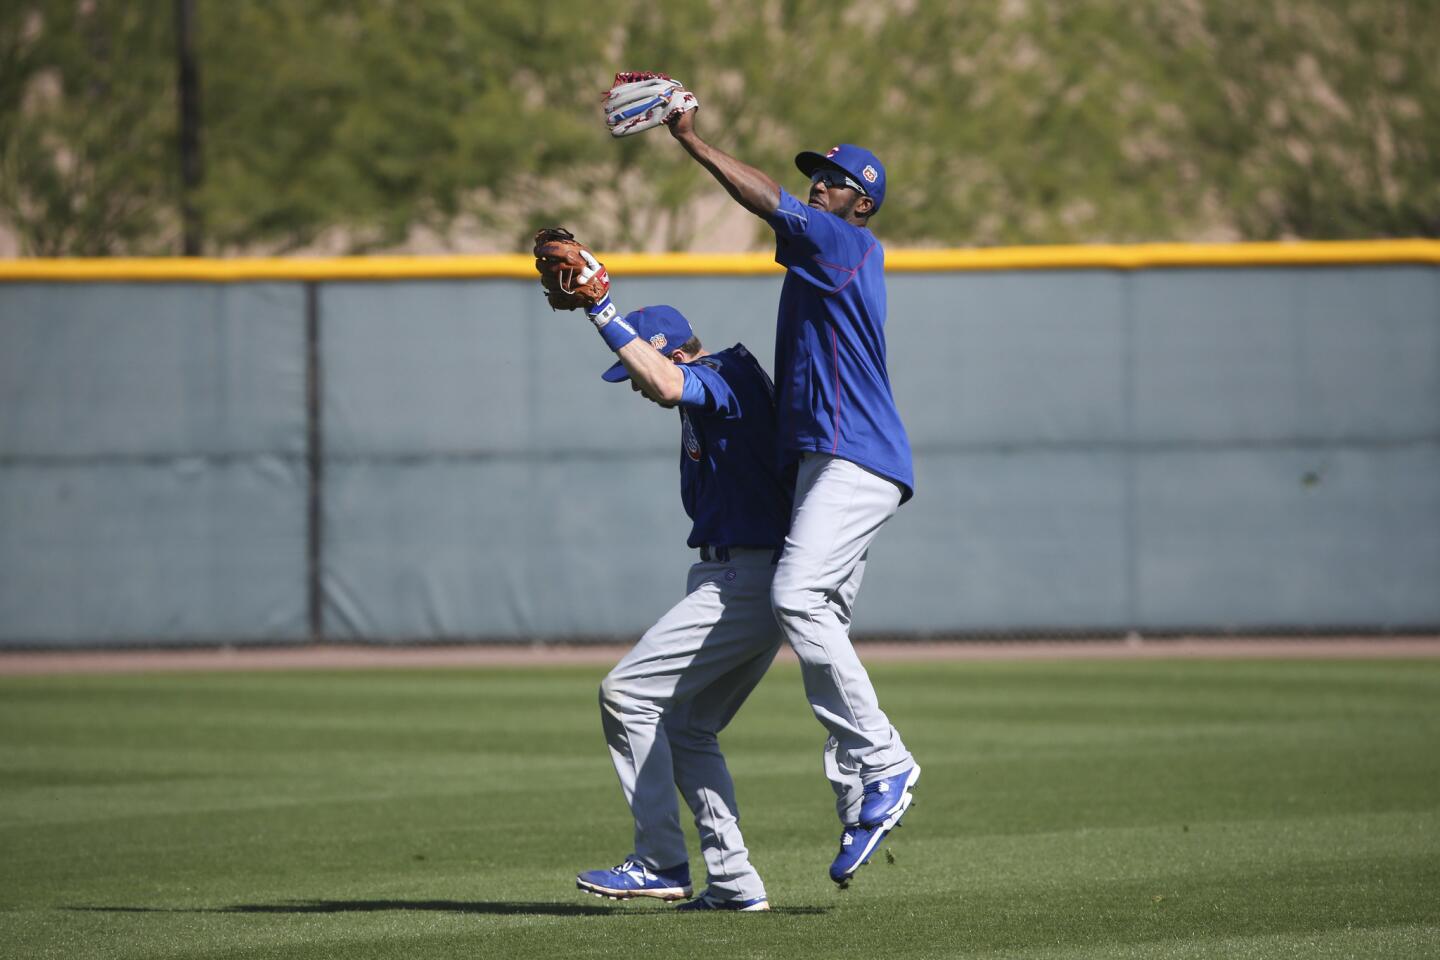 Dexter Fowler attempts to catch a fly ball caught by Ben Zobrist during spring training at Sloan Park Friday, Feb. 26, 2016, in Mesa, Ariz.